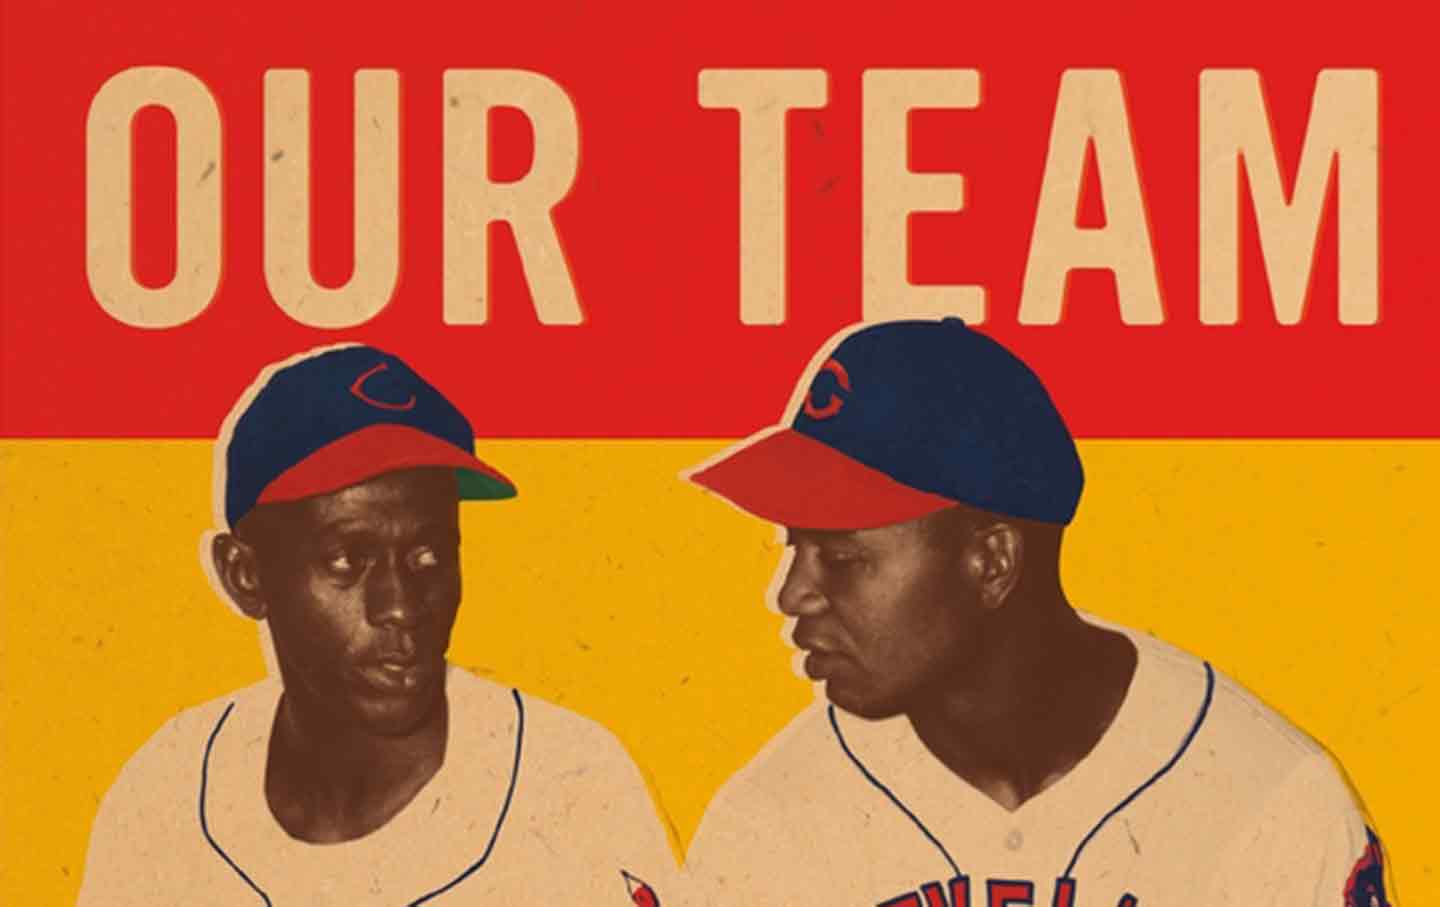 1948 Tribe featured Larry Doby, Satchel Paige